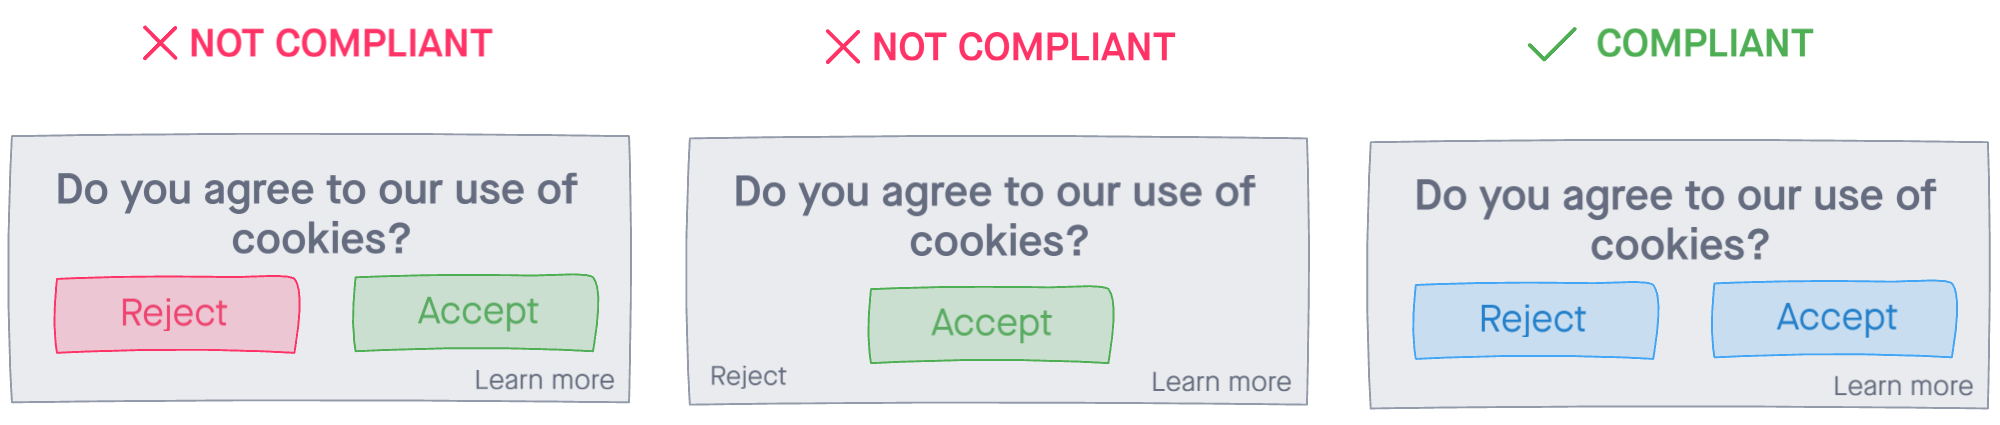 Mockups of three cookie consent pop-ups, two of which are not compliant because of suggestive design choices.